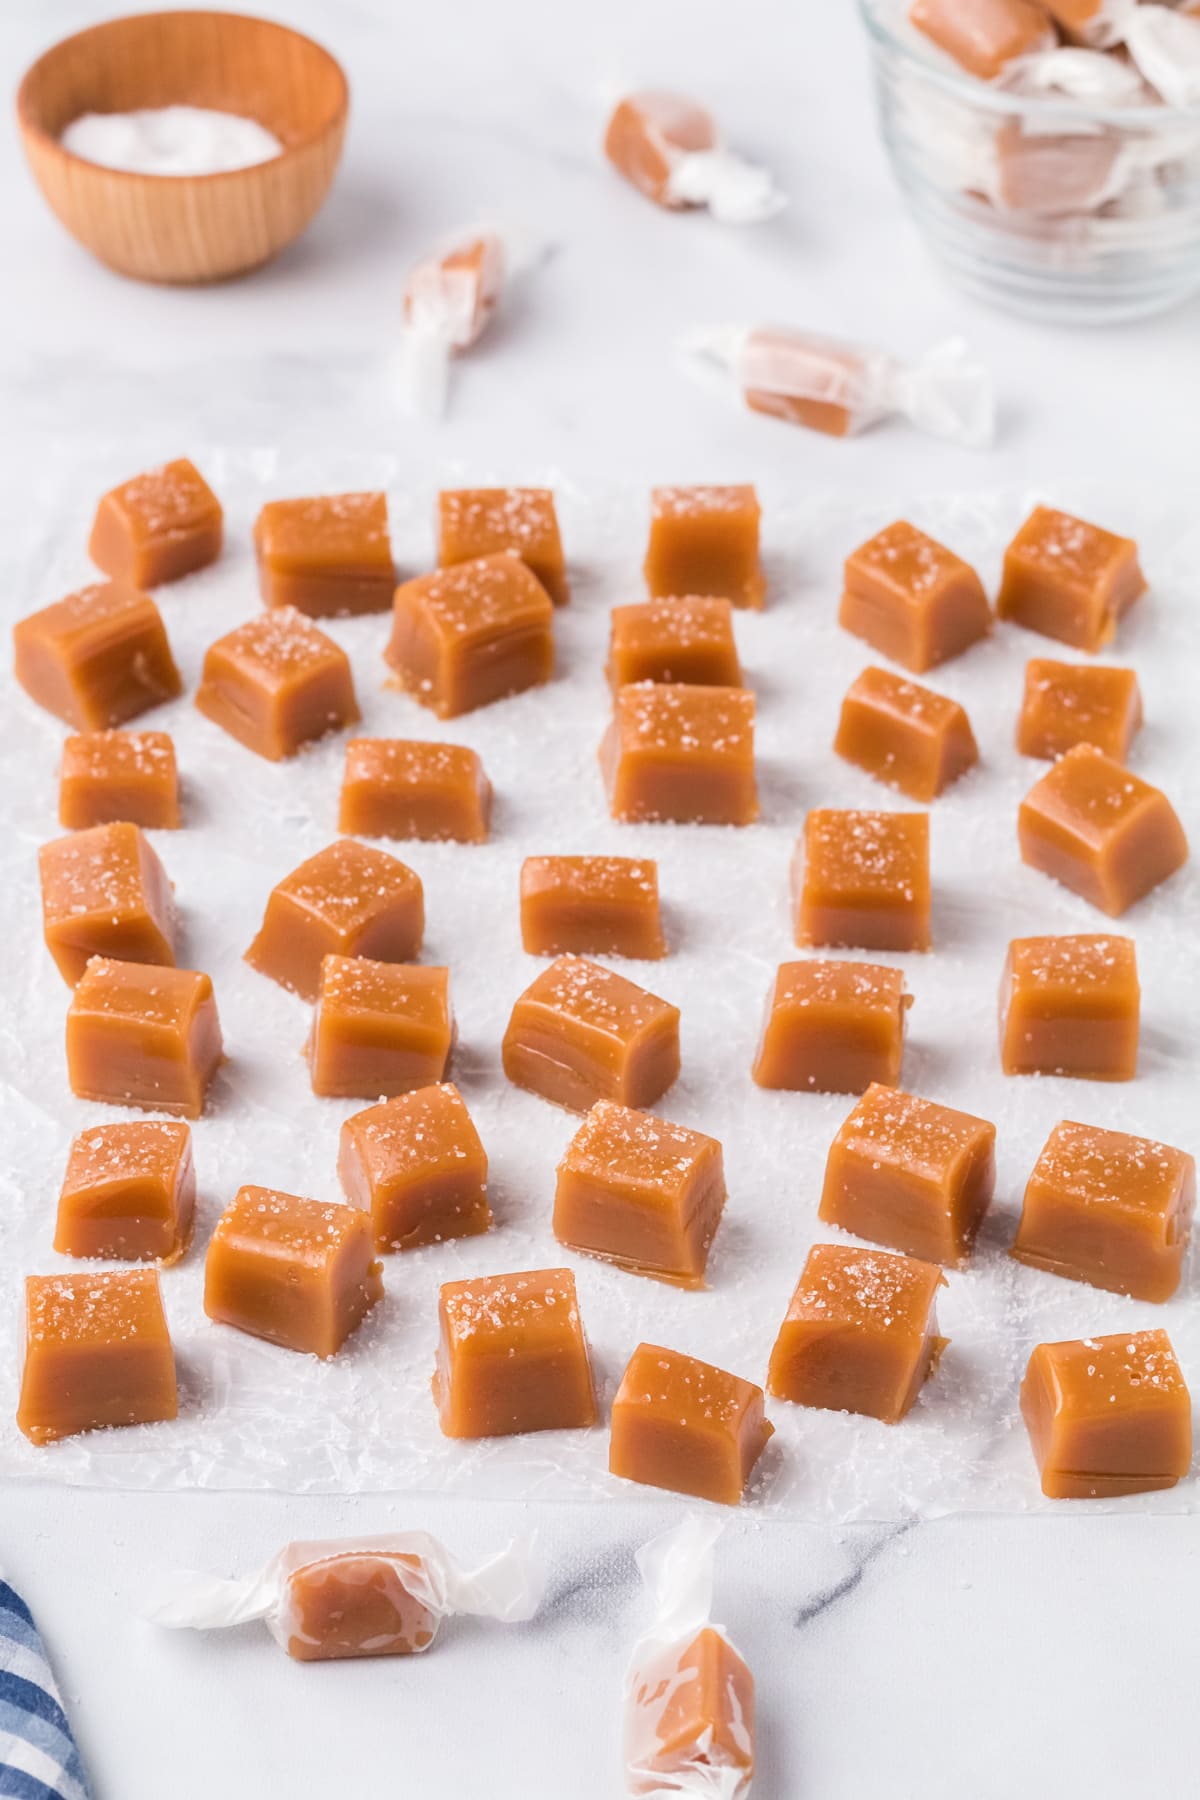 Angled overhead view of caramel candy